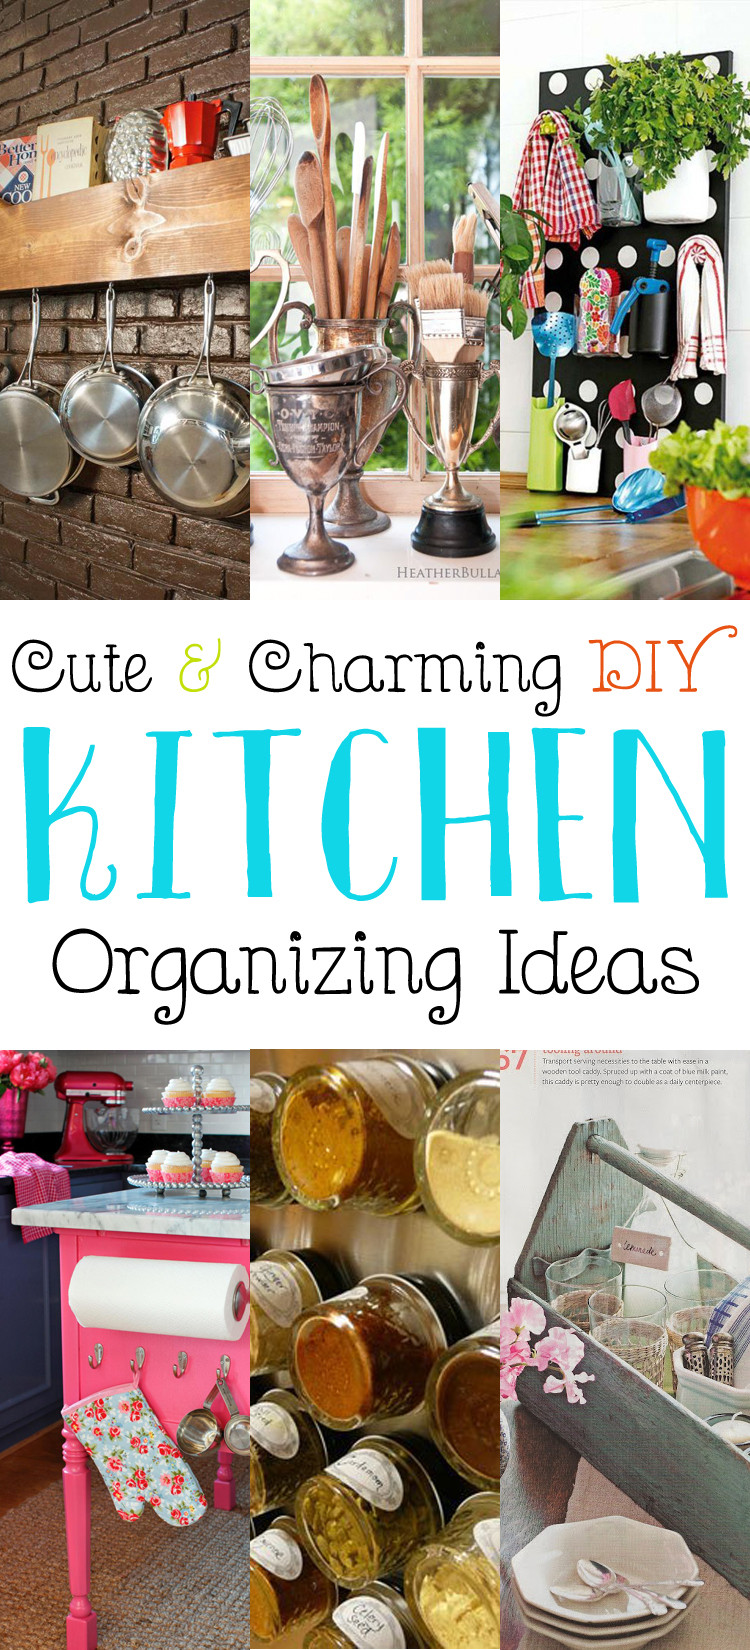 DIY Kitchen Organizing Ideas
 Cute and Charming DIY Kitchen Organizing Ideas The